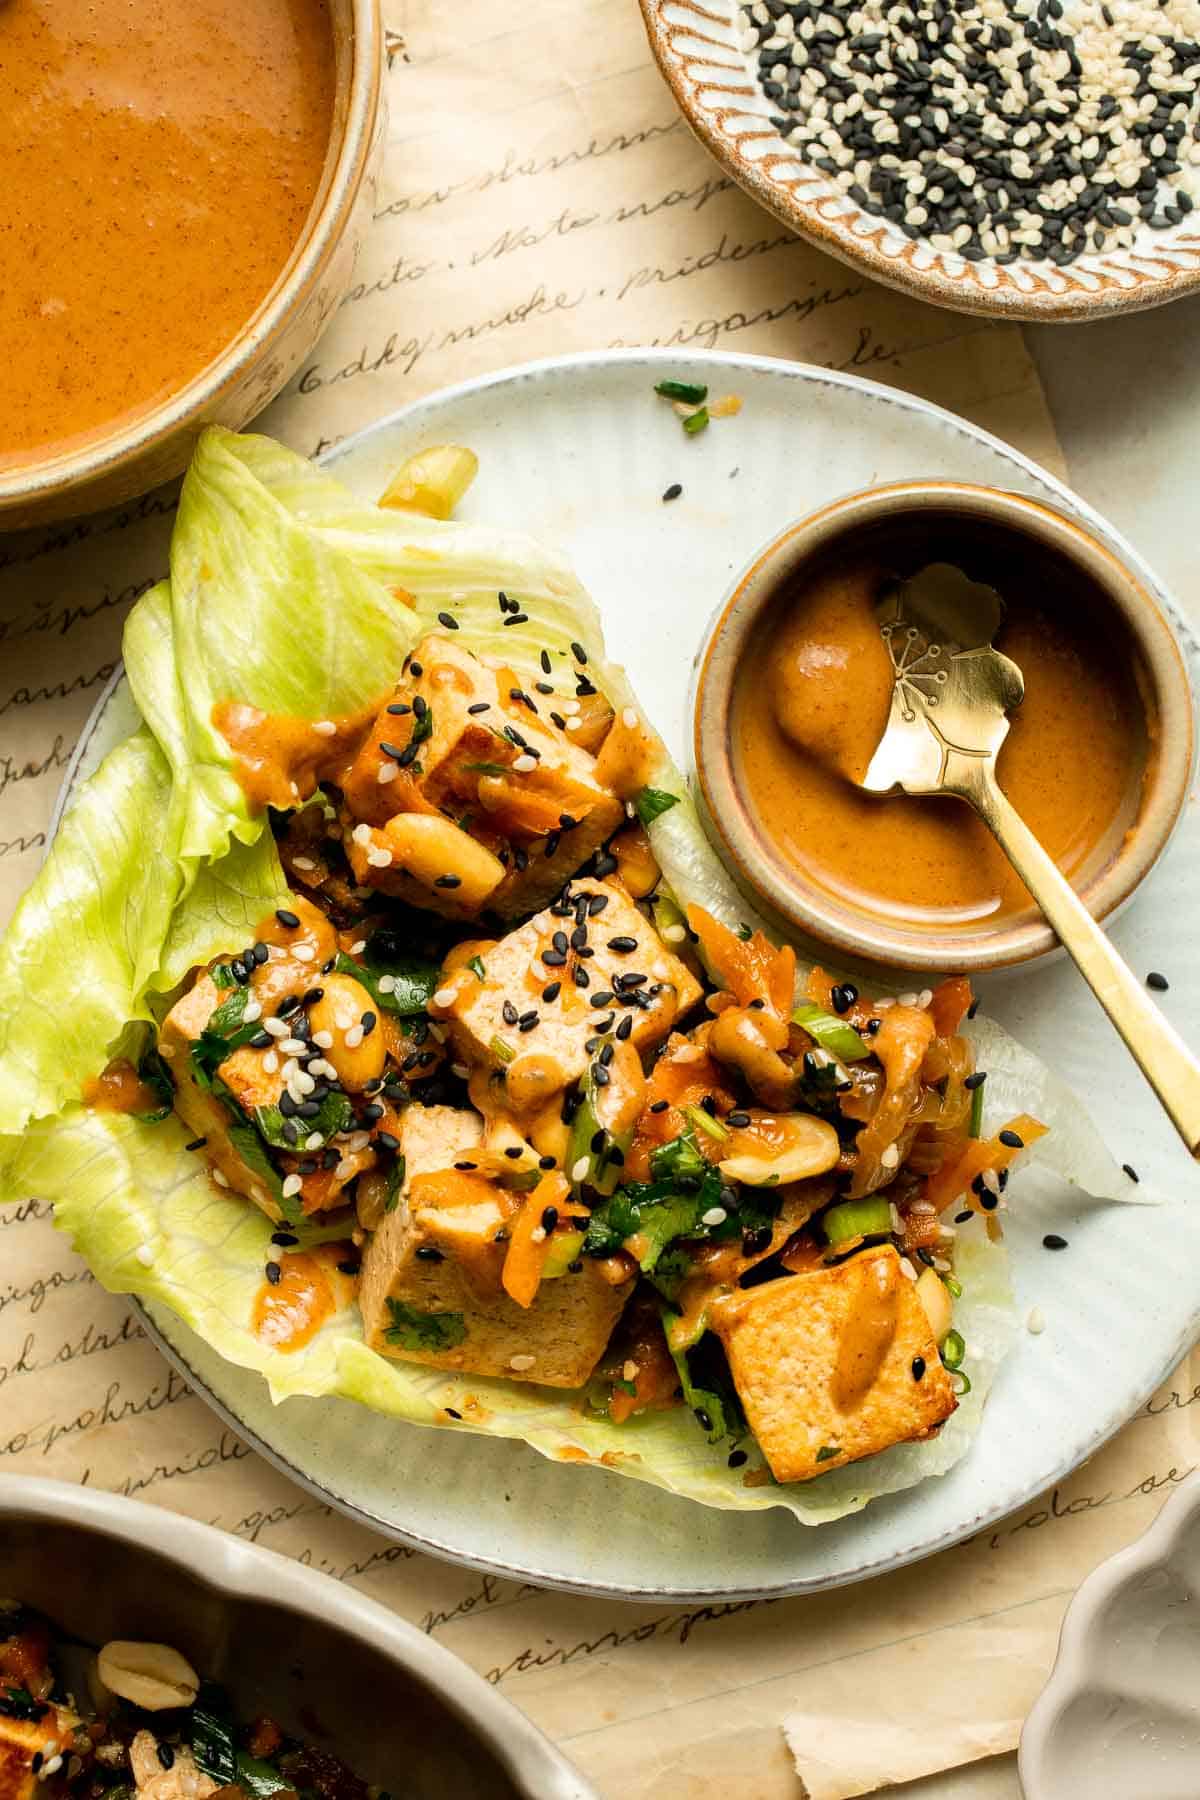 Tofu Lettuce Wraps are filled with a vegan filling of tofu, veggies, and homemade peanut sauce for the best balance of textures and flavors. | aheadofthyme.com